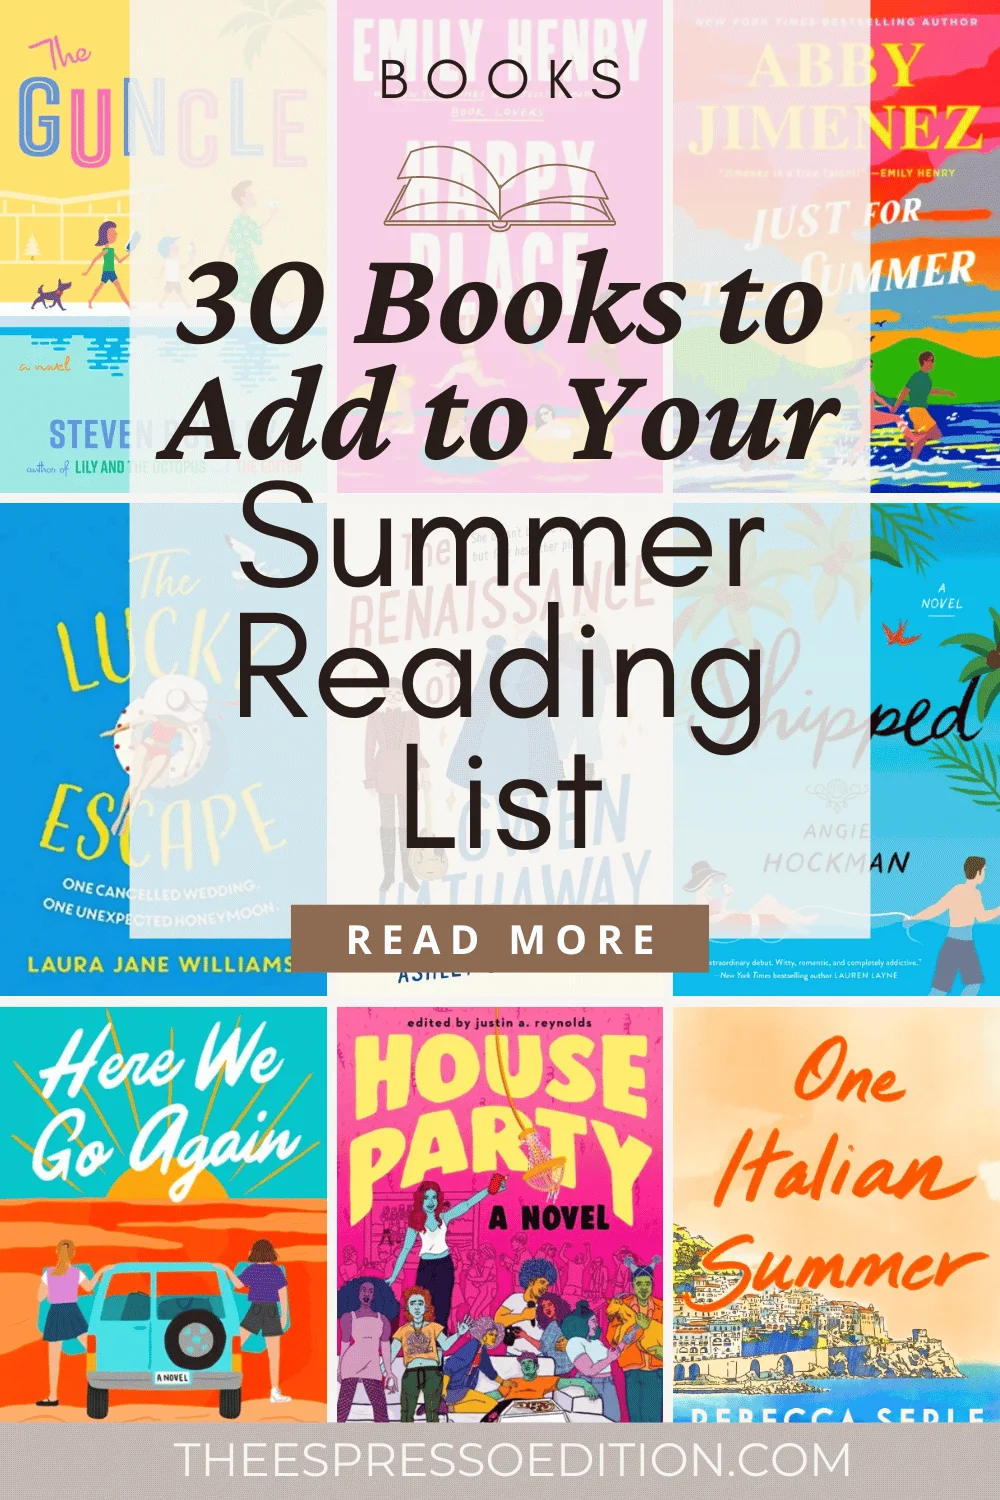 30 Books to Add to Your Summer Reading List by The Espresso Edition cozy bookish blog